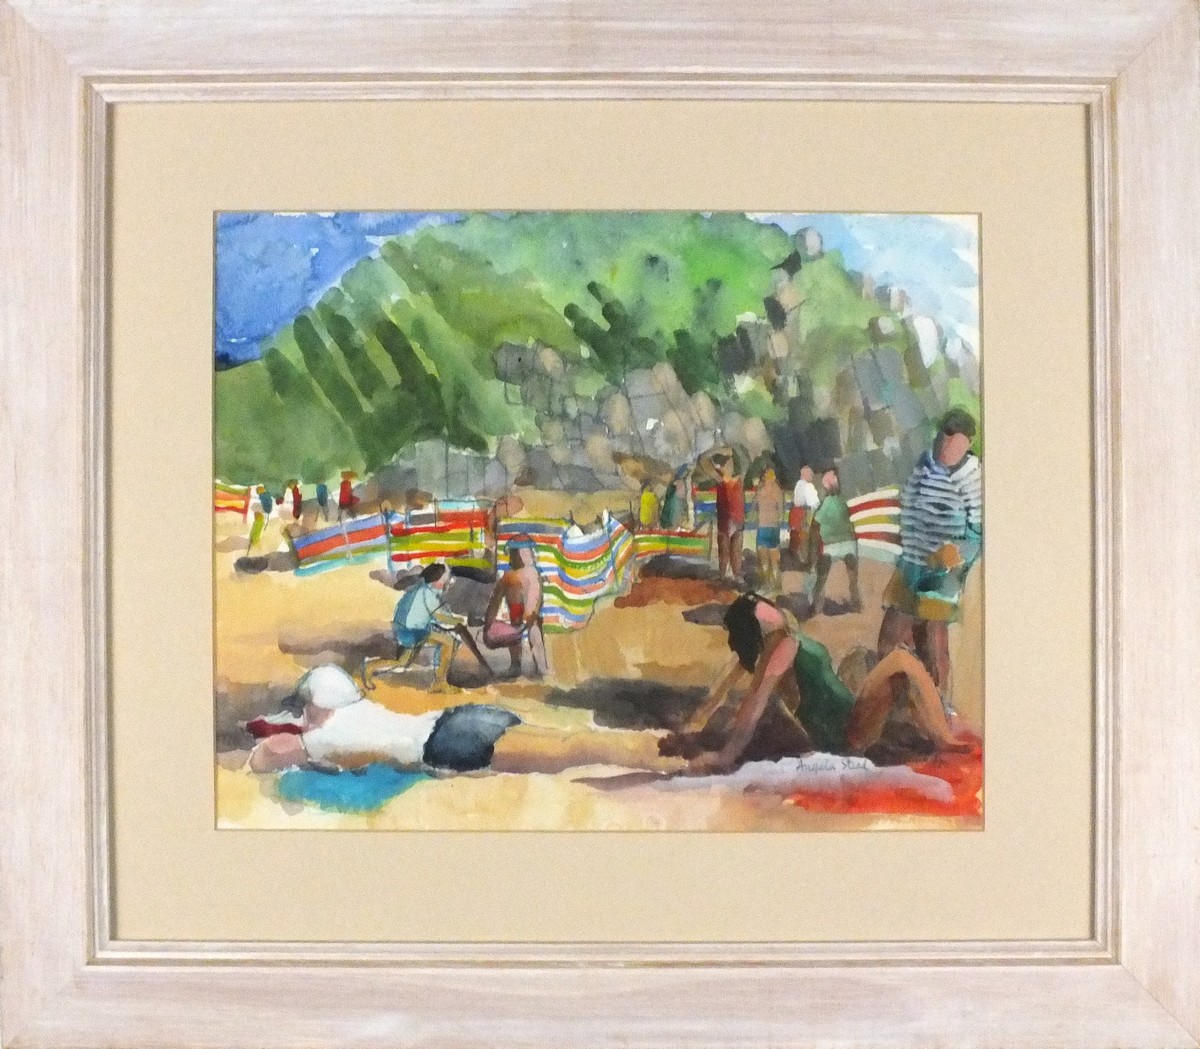 Angela STEAD (British 1928-2018) Figures on a Beach, Watercolour, Signed lower right, 11" x 13. - Image 2 of 2